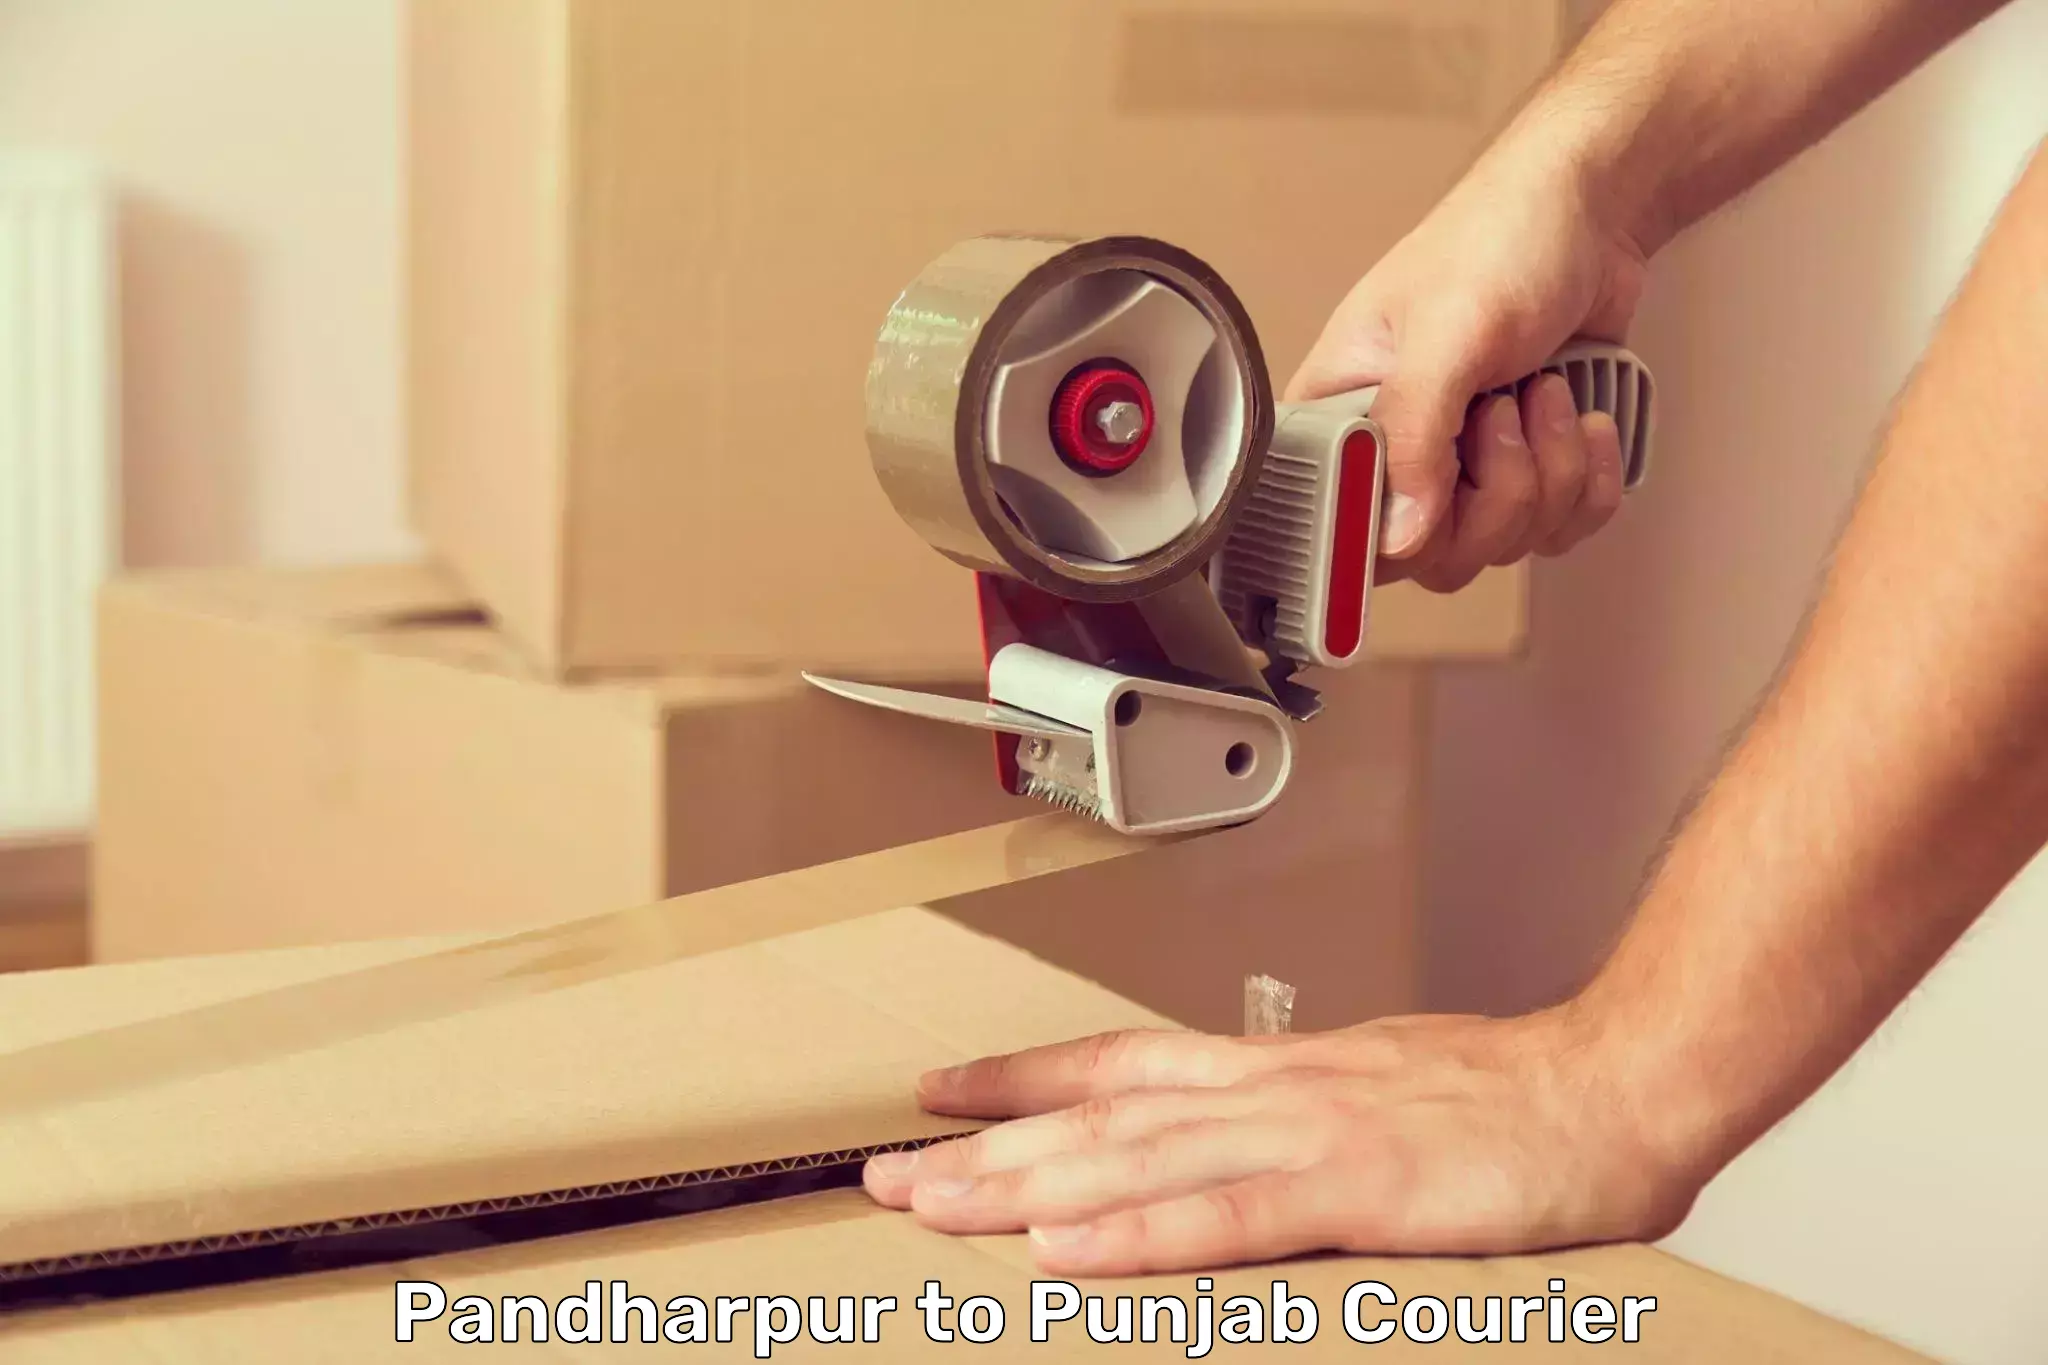 Trackable shipping service Pandharpur to Patiala